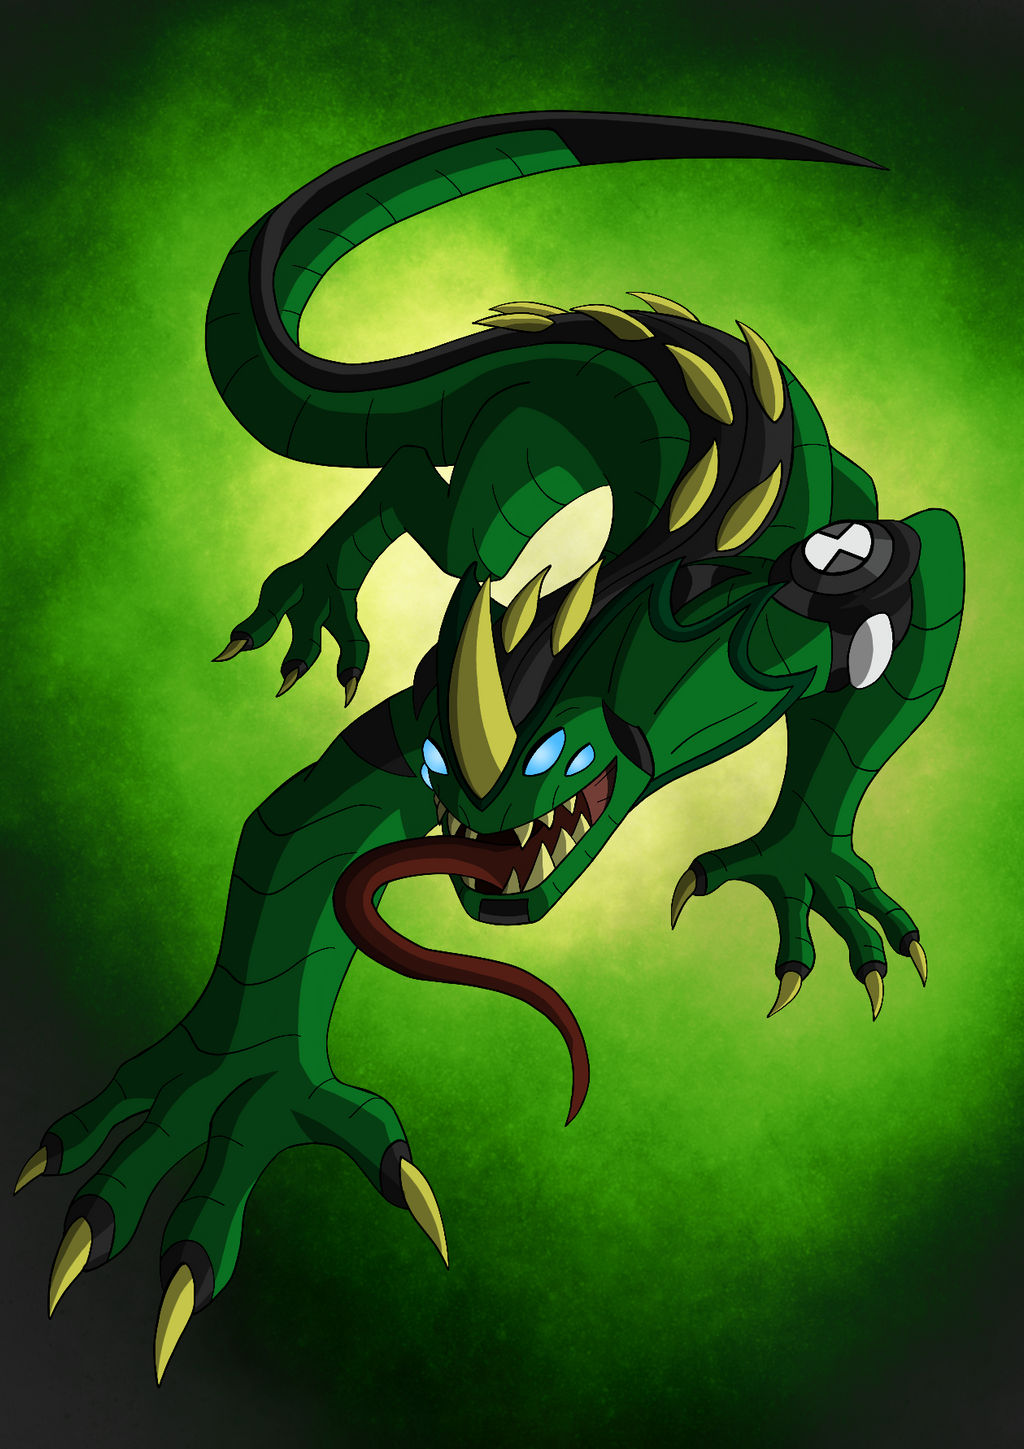 reptile___posed_by_thehawkdown_dclzxgy-fullview.jpg